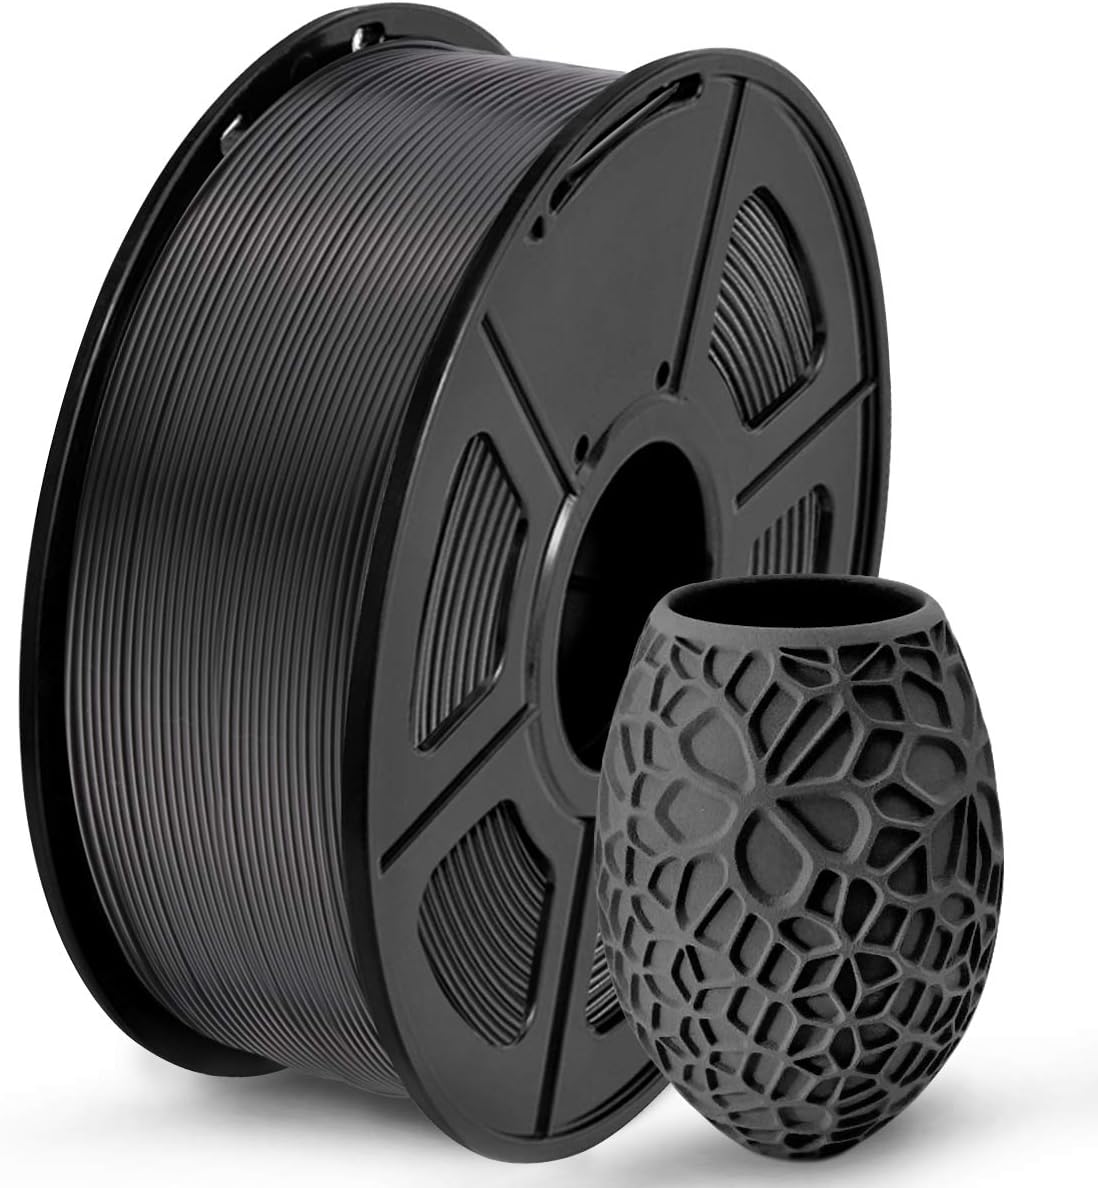 Sunlu PLA | Best Cheap PLA Filament from Amazon: What to buy?